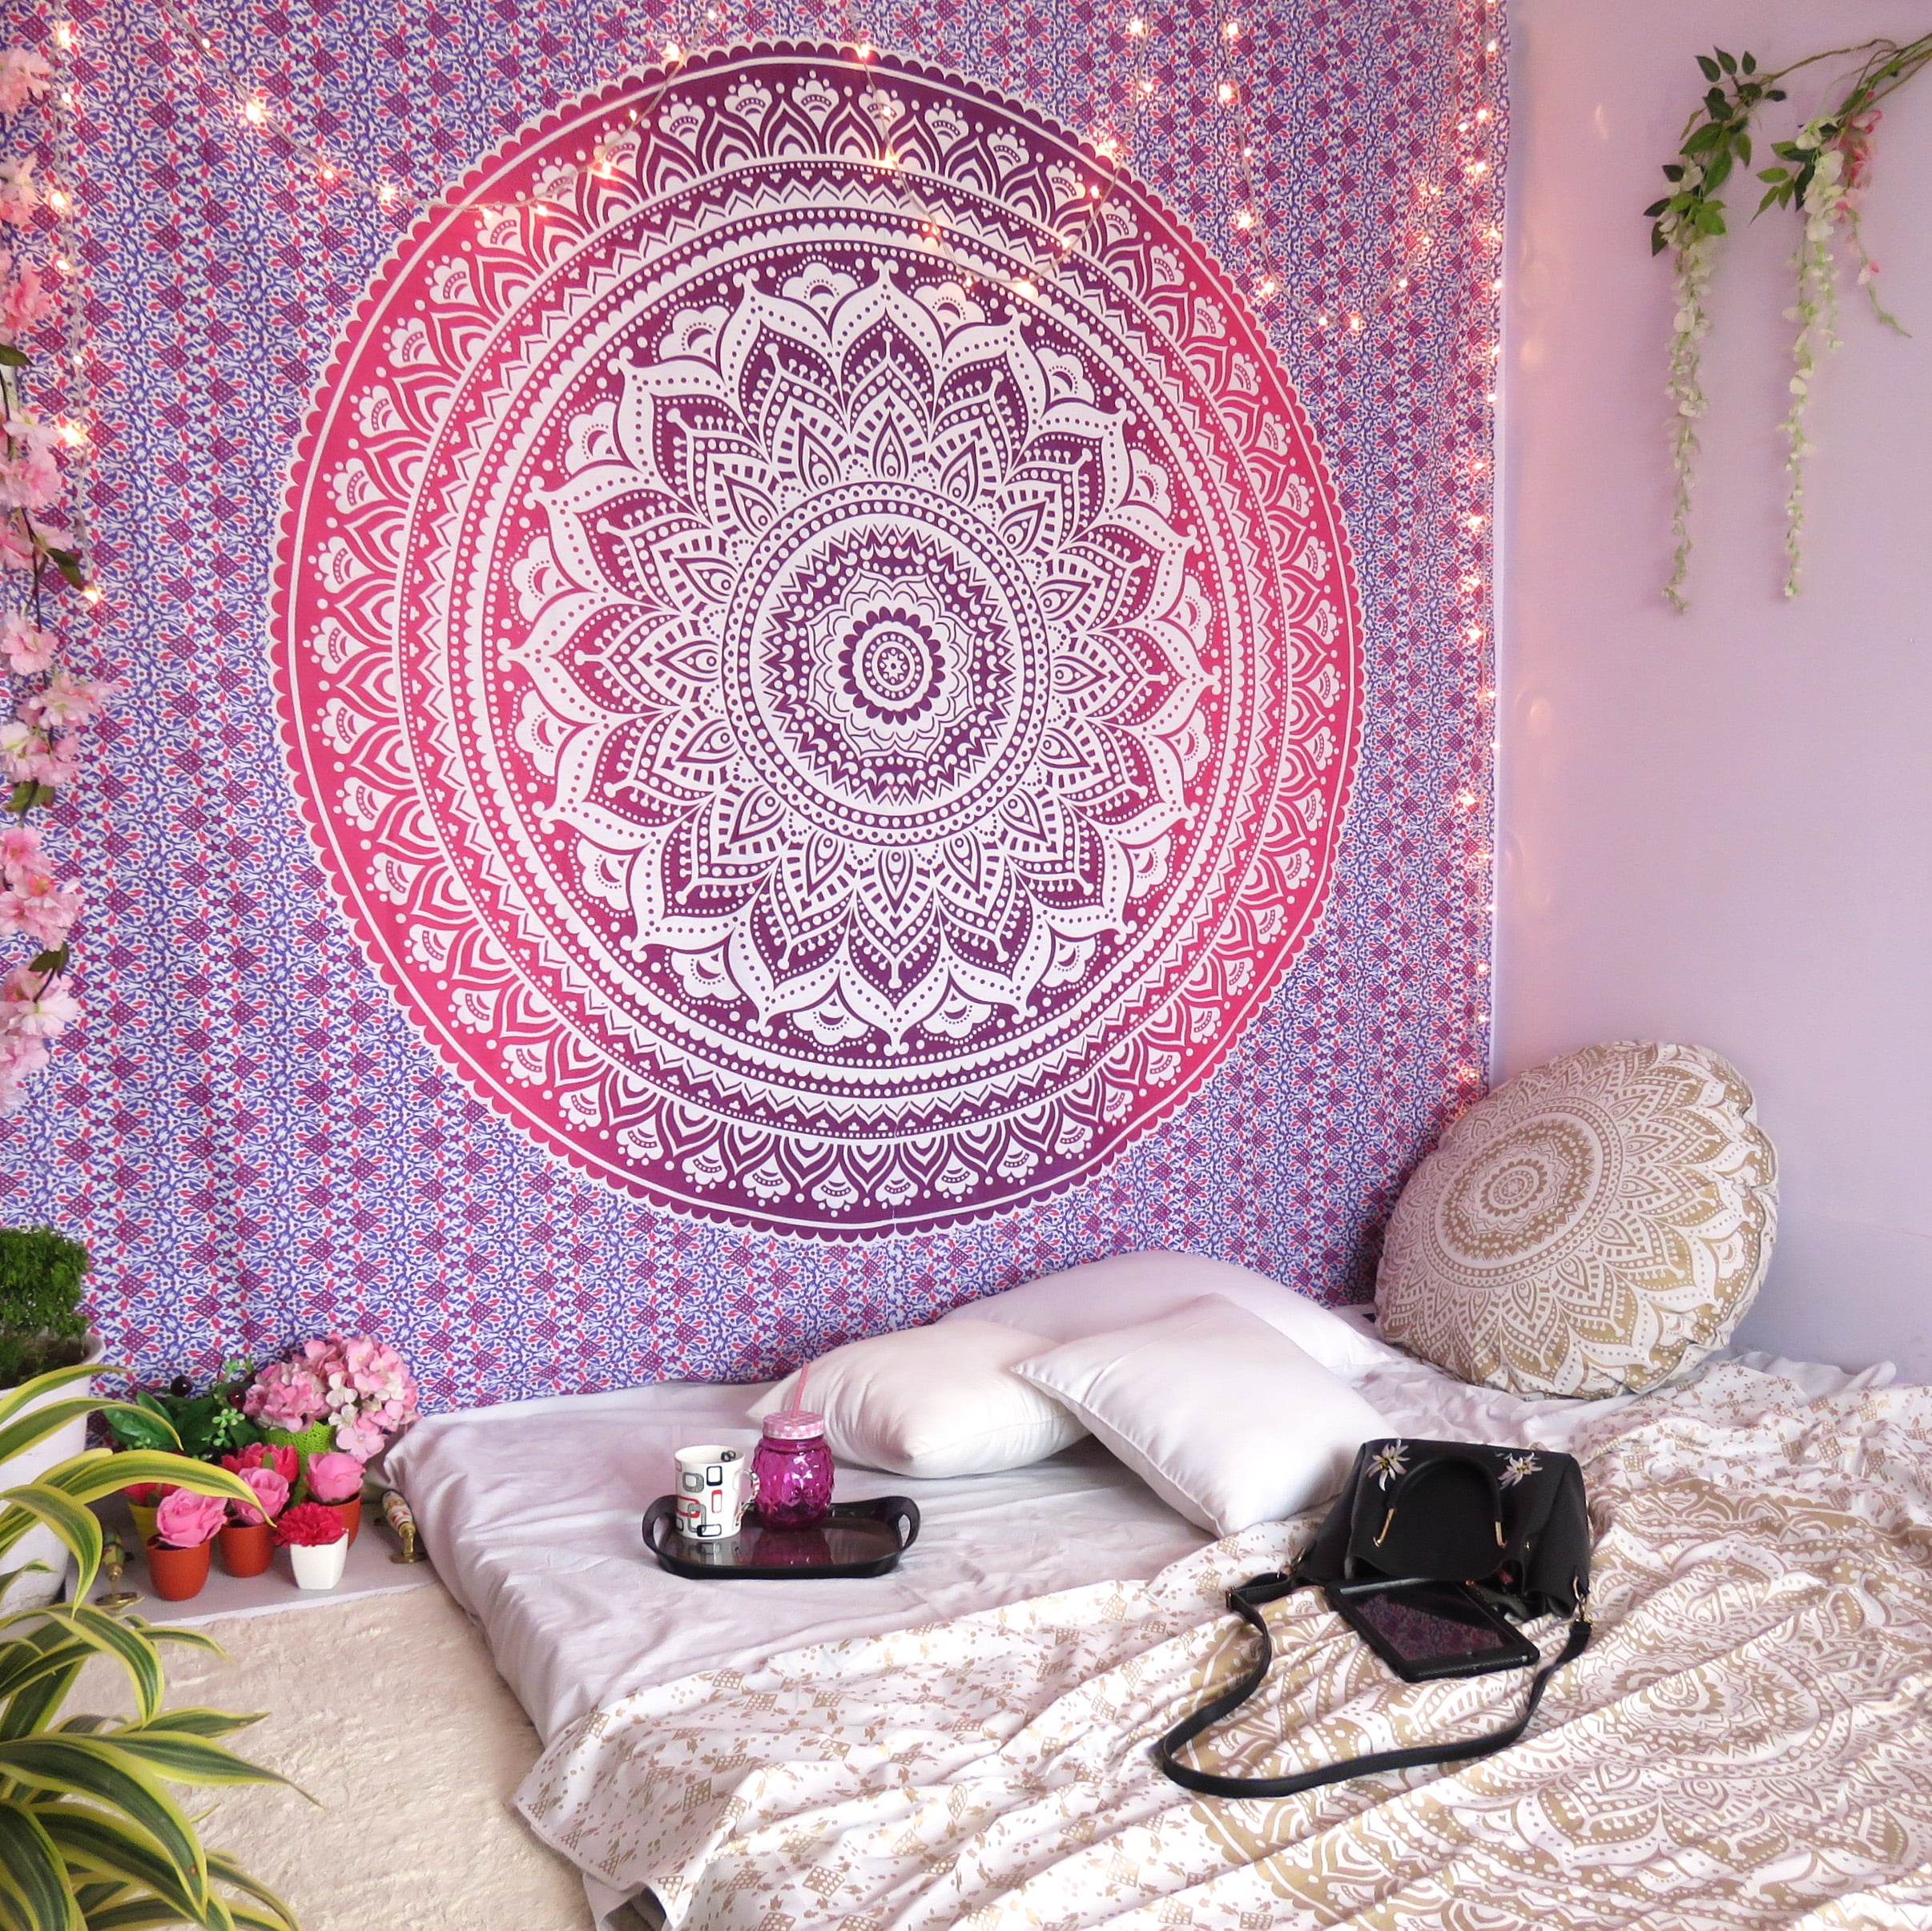 Purple Ombre Bohemian Mandala Tapestry Twin Indian Wall Hanging Throw Bedspread 